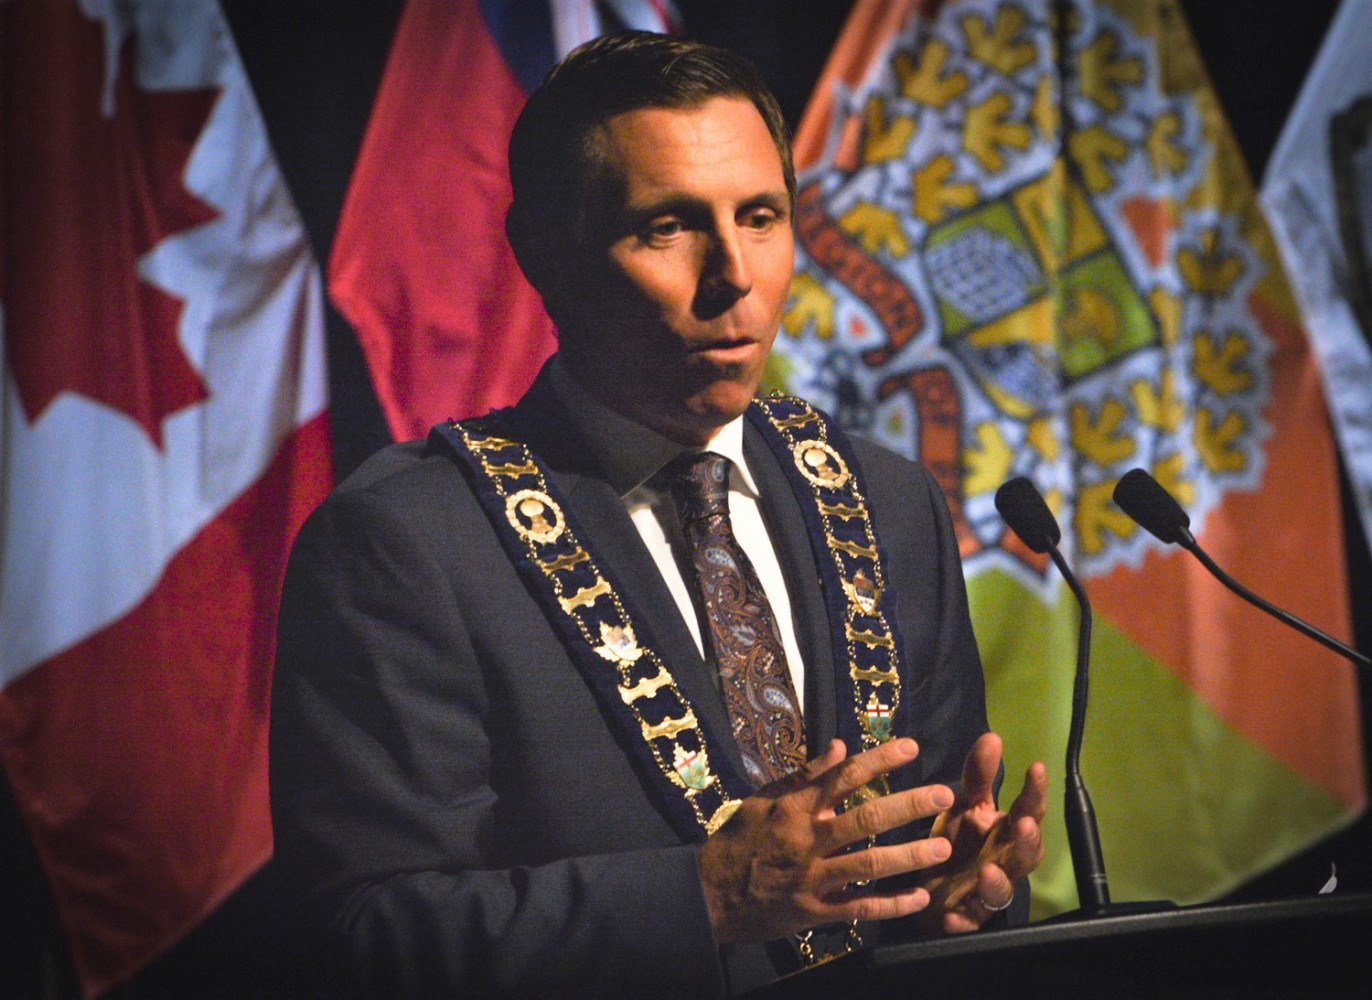 After ignoring Brampton’s most critical needs Patrick Brown asks federal government for help